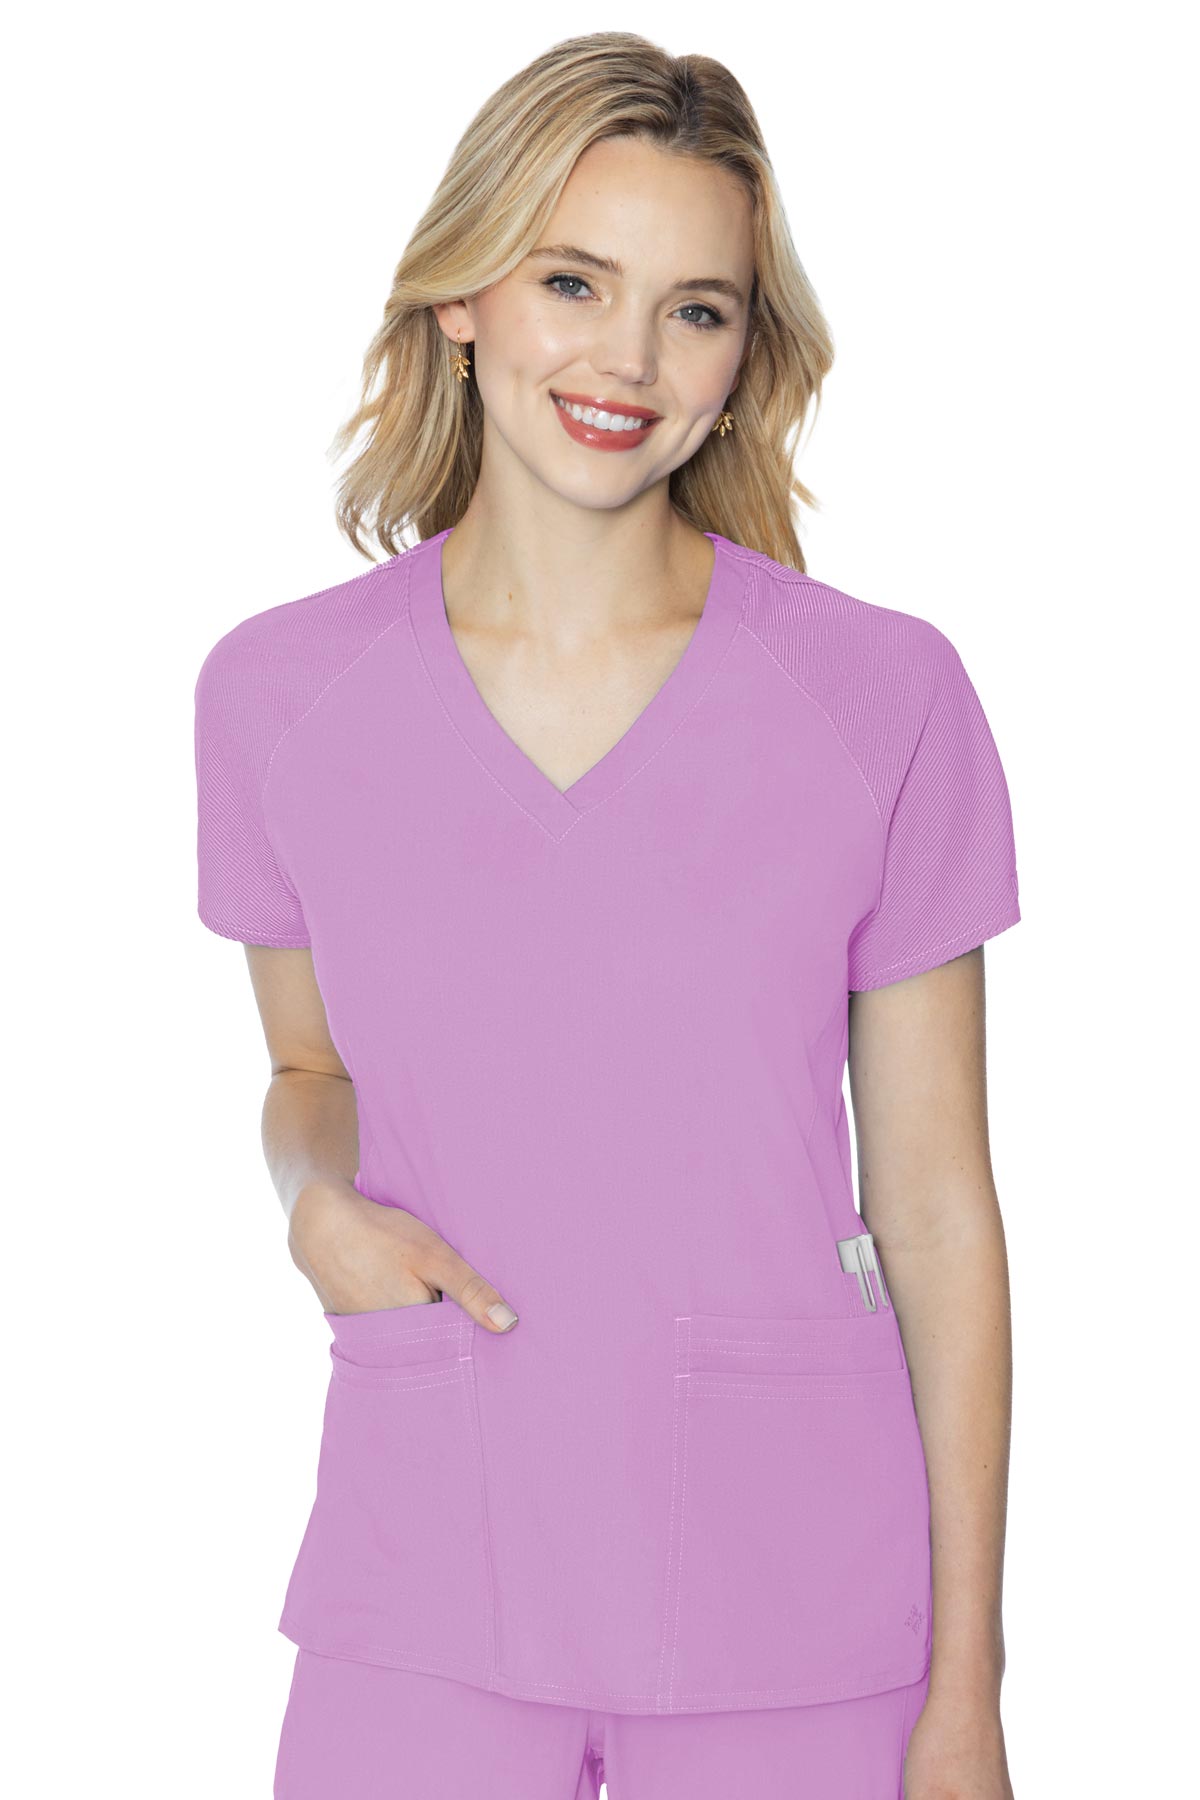 Med Couture Scrub Top Touch Raglan Sleeve in lilac at Parker's Clothing and Shoes.